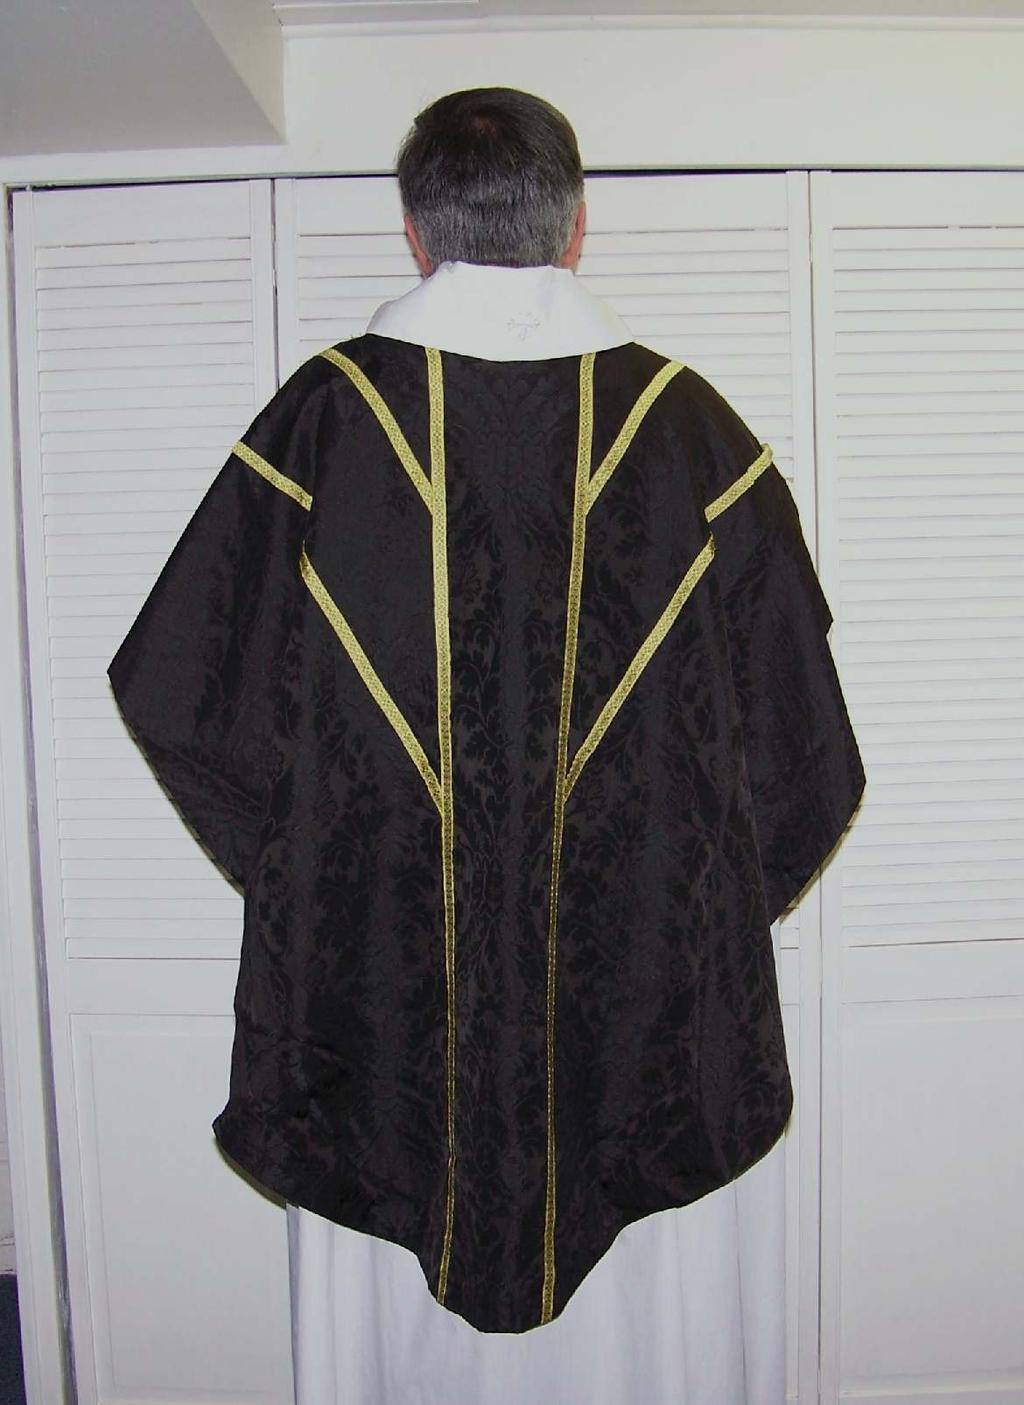 We also use purple for hearing confessions and for times of blessing (such as e blessing of candles at Presentation, e blessing of ashes on Ash Wednesday,